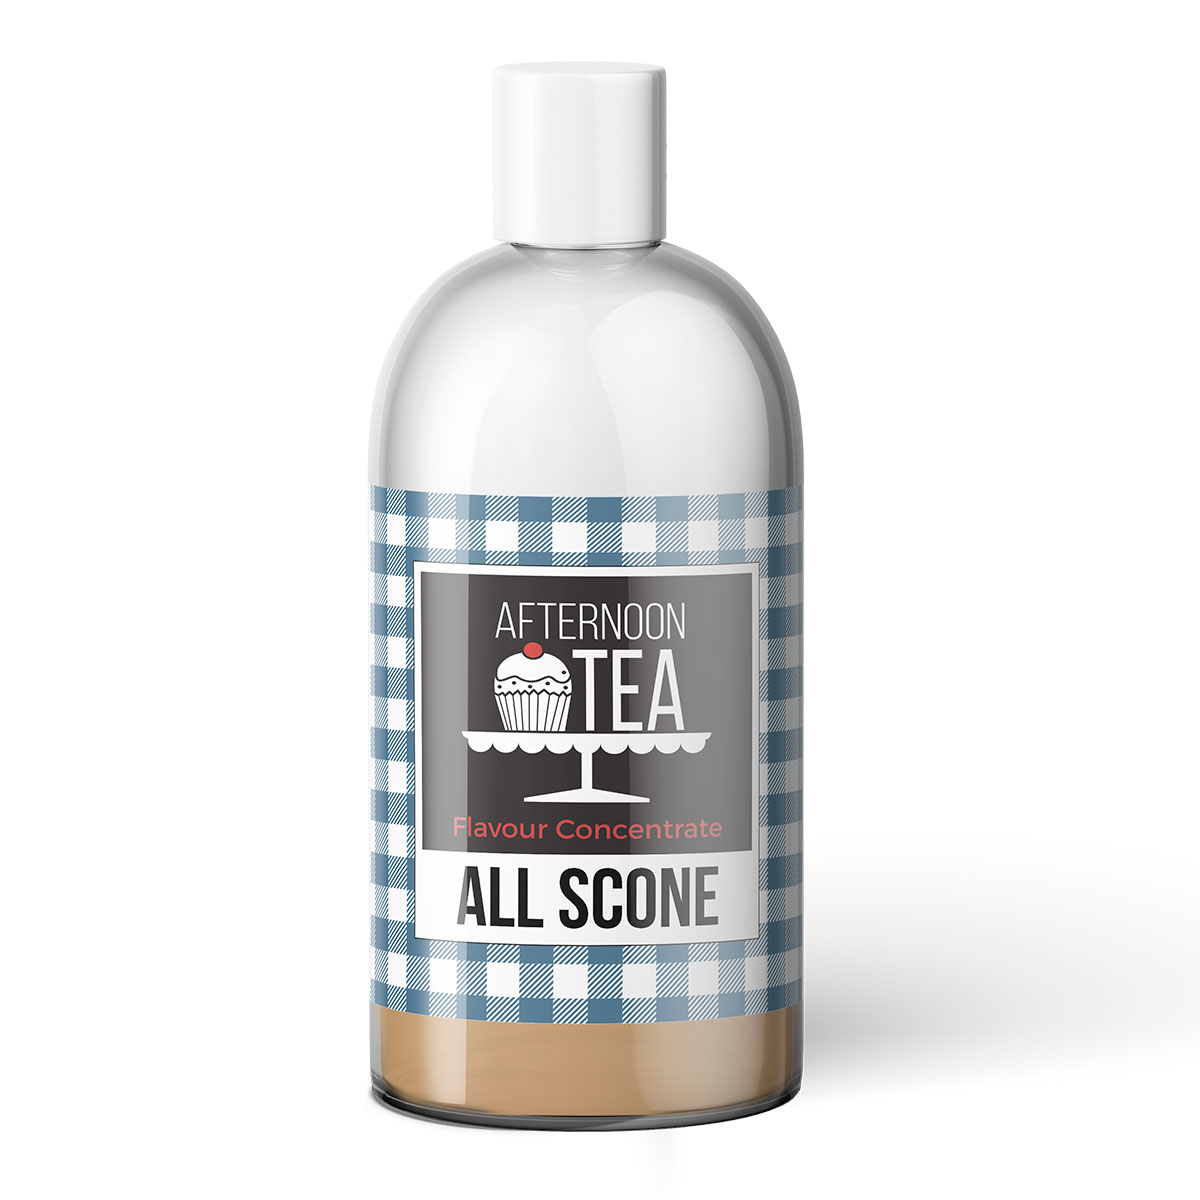 All Scone Flavour Shot by Afternoon Tea - 250ml